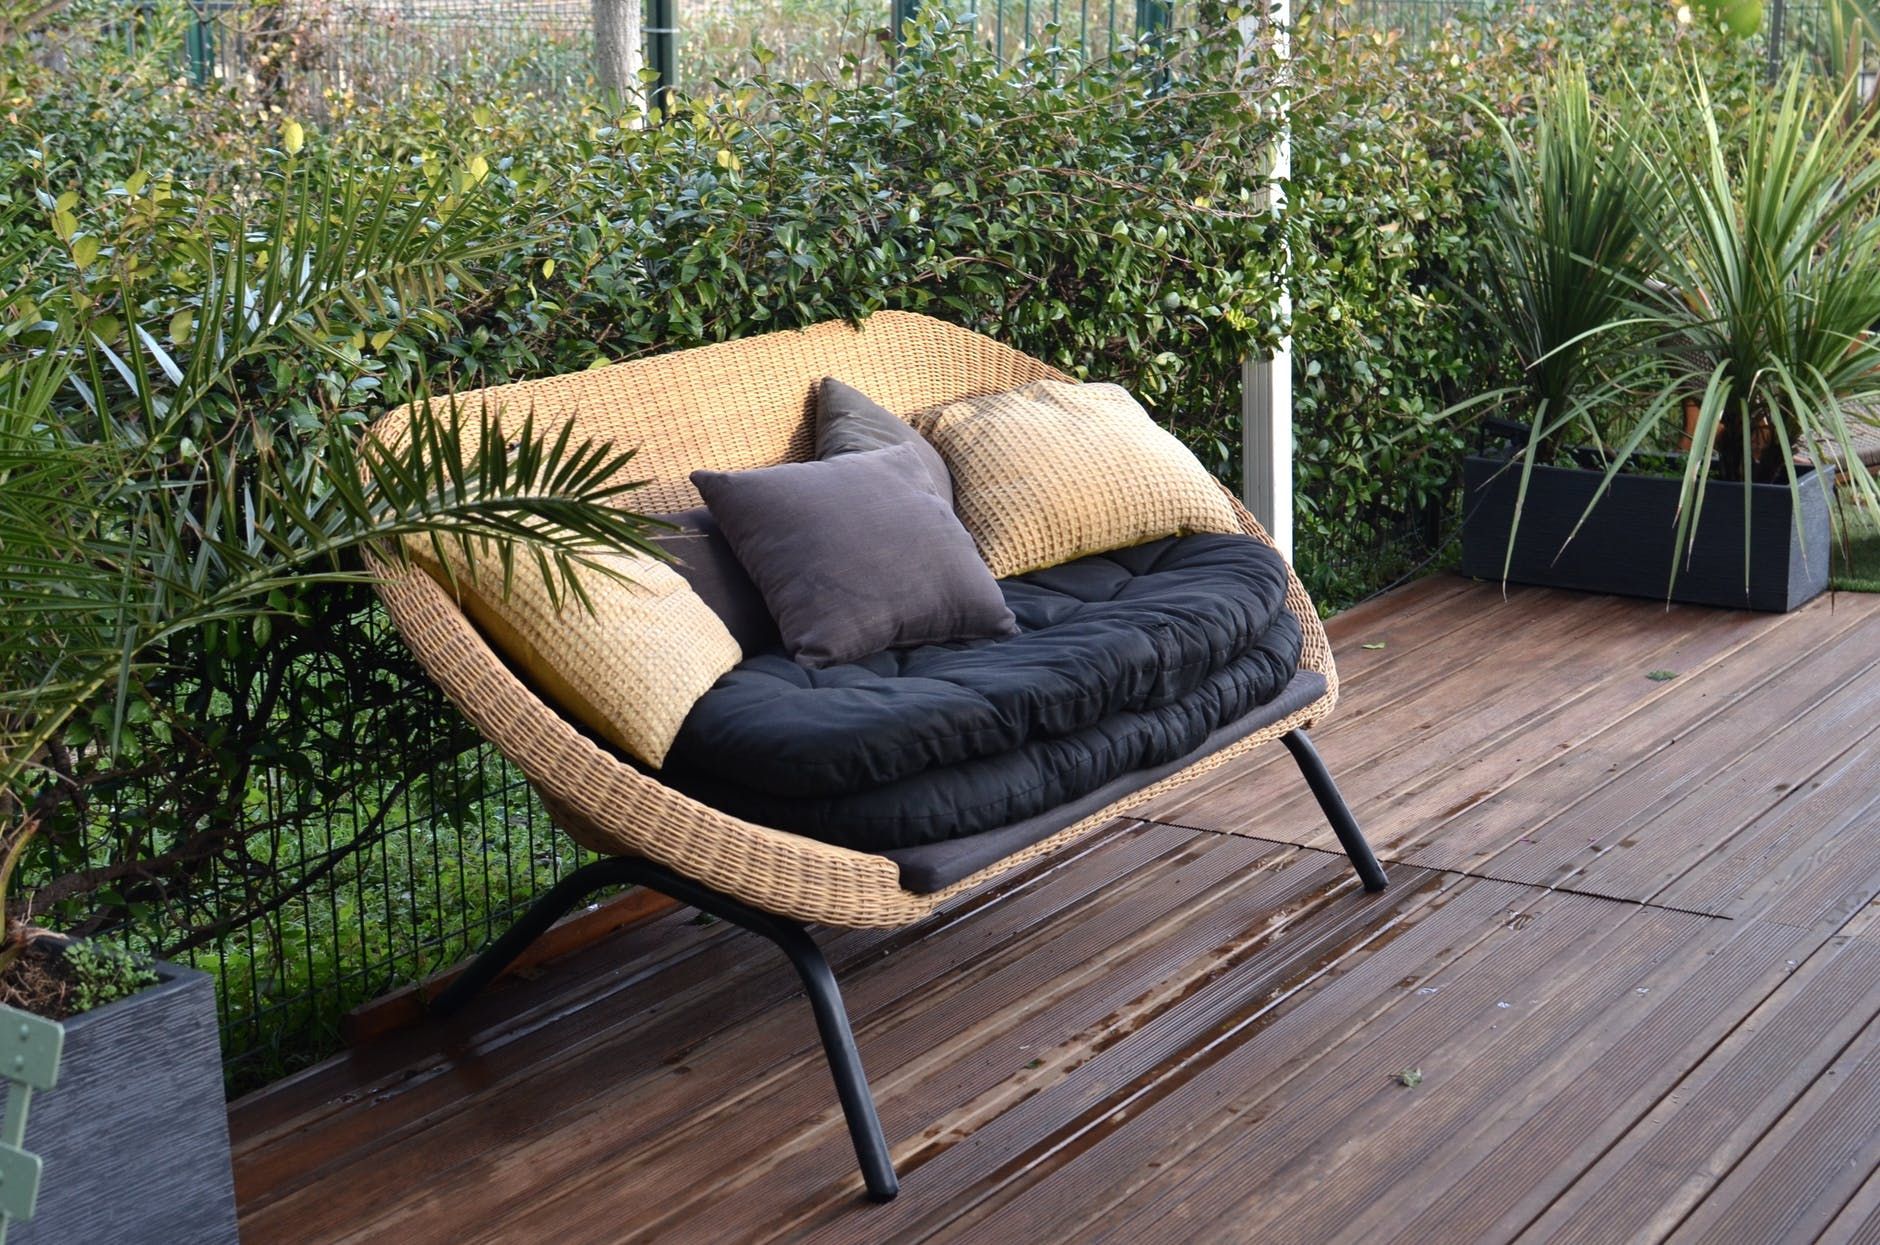 A chair next top a plant covered railing on a wooden deck